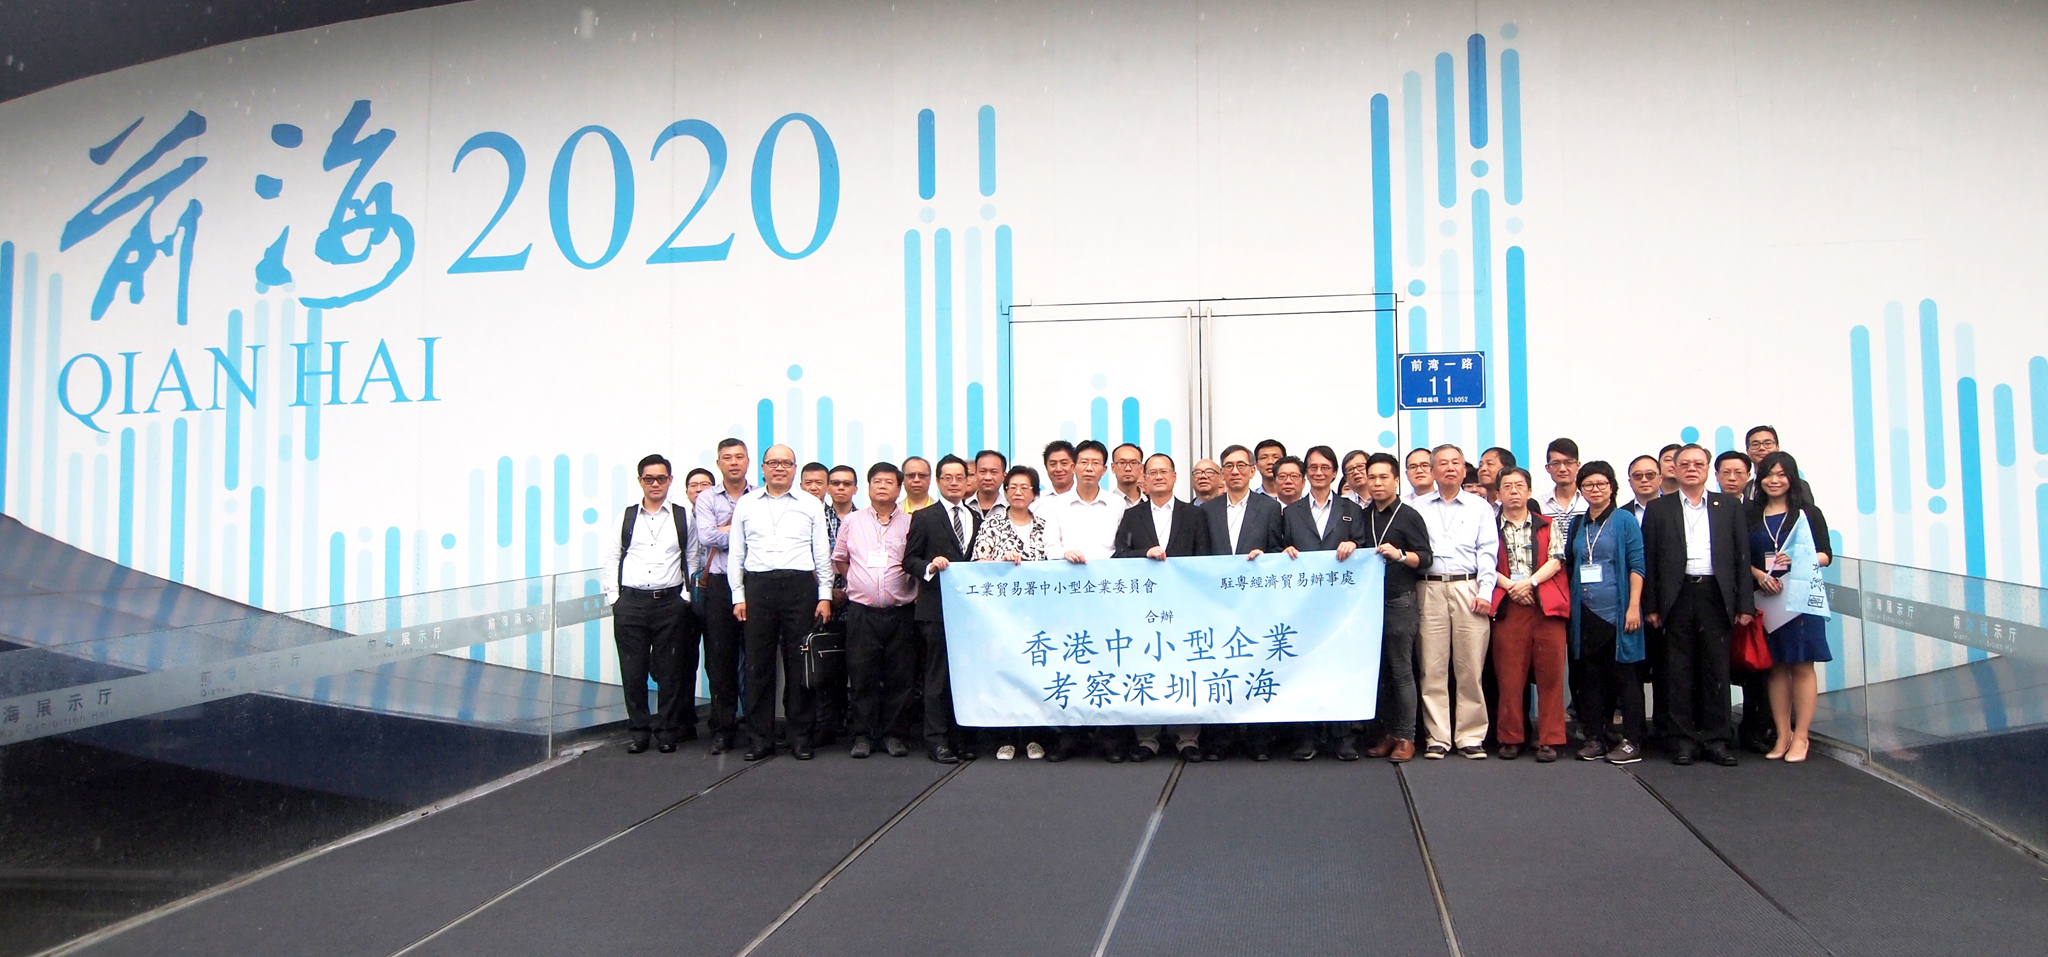 Photo 14 : The Small and Medium Enterprises Committee (SMEC) and the Guangdong Economic and Trade Office (GDETO) co-organised a Delegation visit to the "Qianhai Shenzhen-Hong Kong Modern Service Industry Cooperation Zone", and "Shekou Area of Shenzhen of the China (Guangdong) Pilot Free Trade Zone" on 7 September 2015.  The Delegation was led by the SMEC Chairman Dr Johnathan CHOI, Director-General of Trade and Industry, and Director of GDETO.  There were over 50 participants coming from the SMEC, major Hong Kong Chambers of Commerce and SME associations.  The Delegation was received by the Qianhai Authority and the authority of the "Shekou Area of Shenzhen of the China (Guangdong) Pilot Free Trade Zone".  It visited the Qianhai Exhibition Hall, Qianhai Enterprise Dream Park and the Shekou Network Valley.  Participants also had an exchange with representatives of the Qianhai Authority to understand the latest development and business opportunities of Qianhai, and experiences of Hong Kong enterprises in developing these businesses in Qianhai.